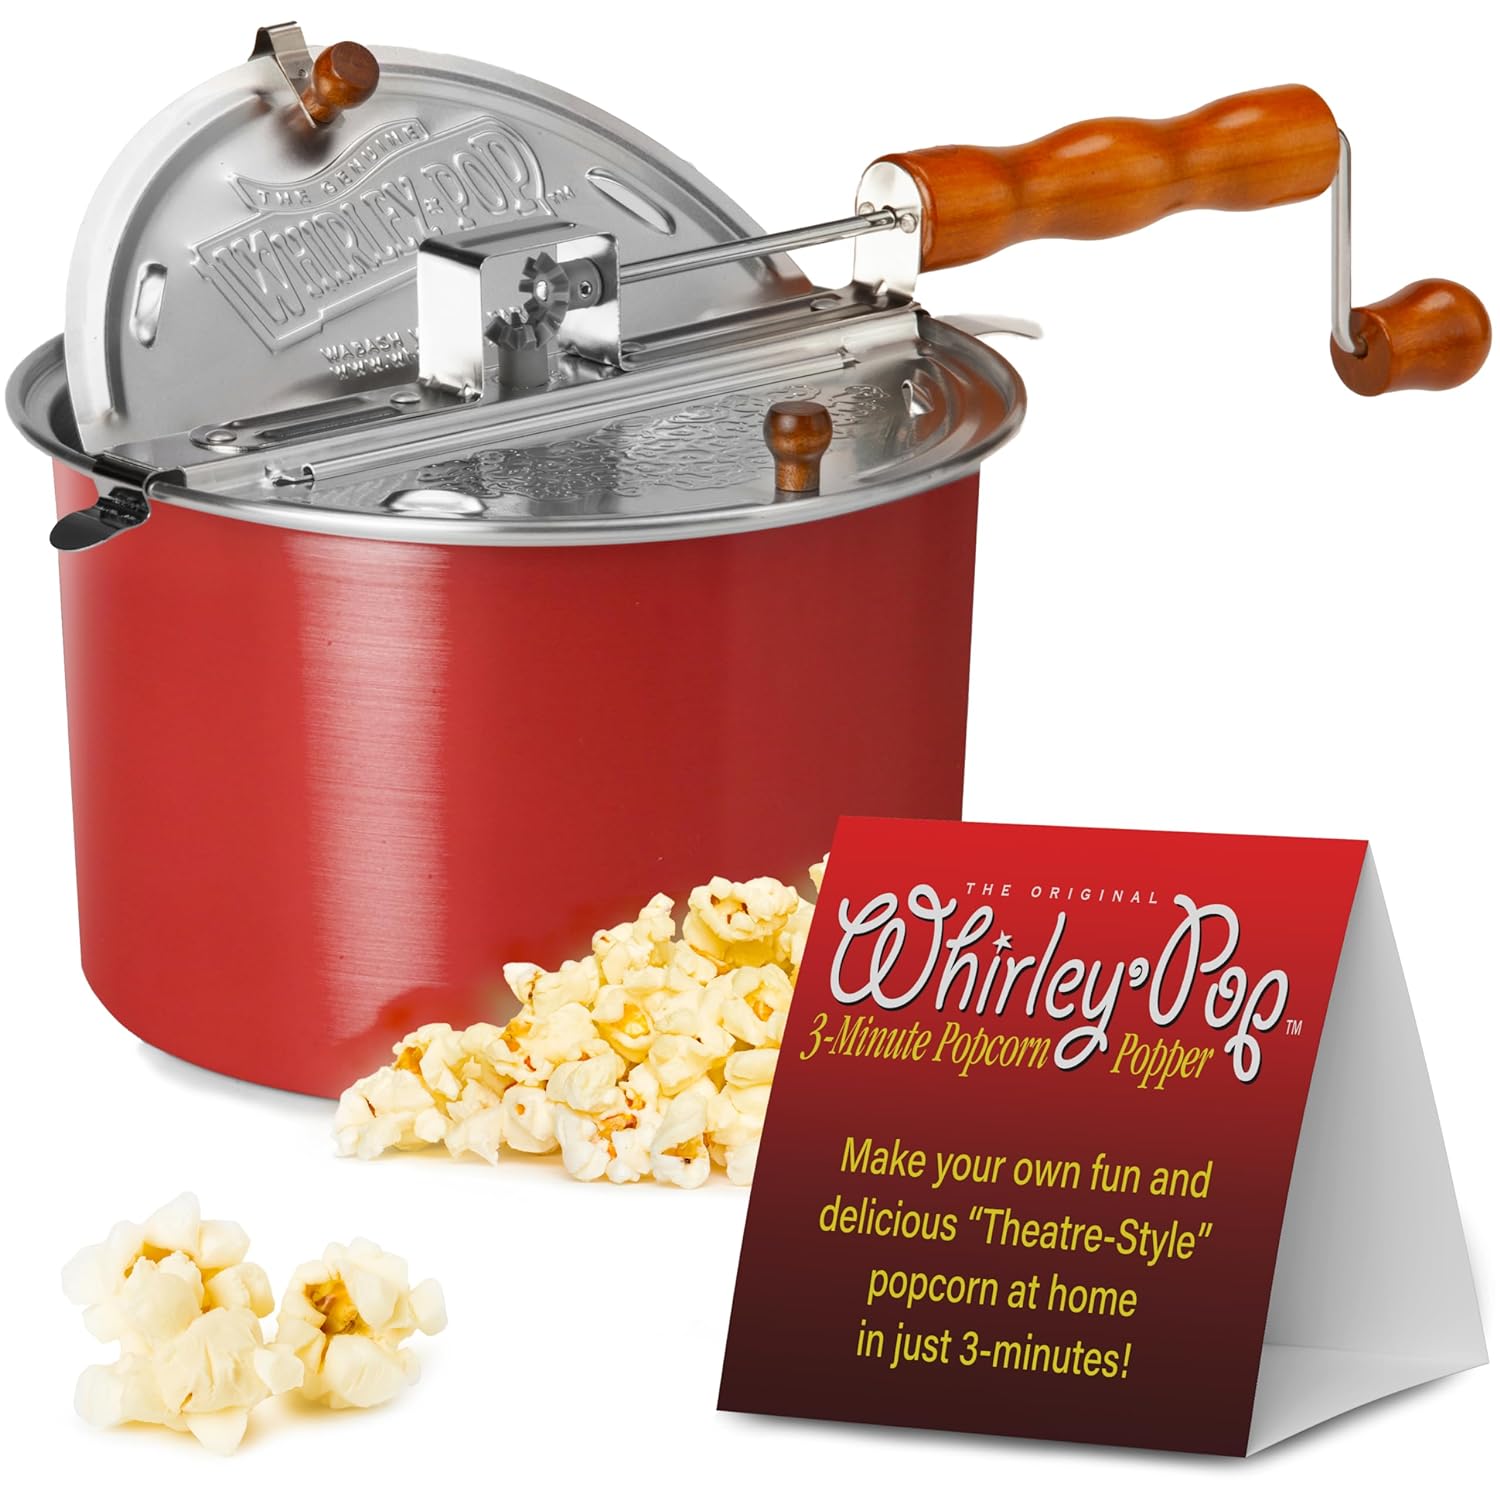 Wabash Valley Farms: The Original Whirley Pop Stovetop Popcorn Popper